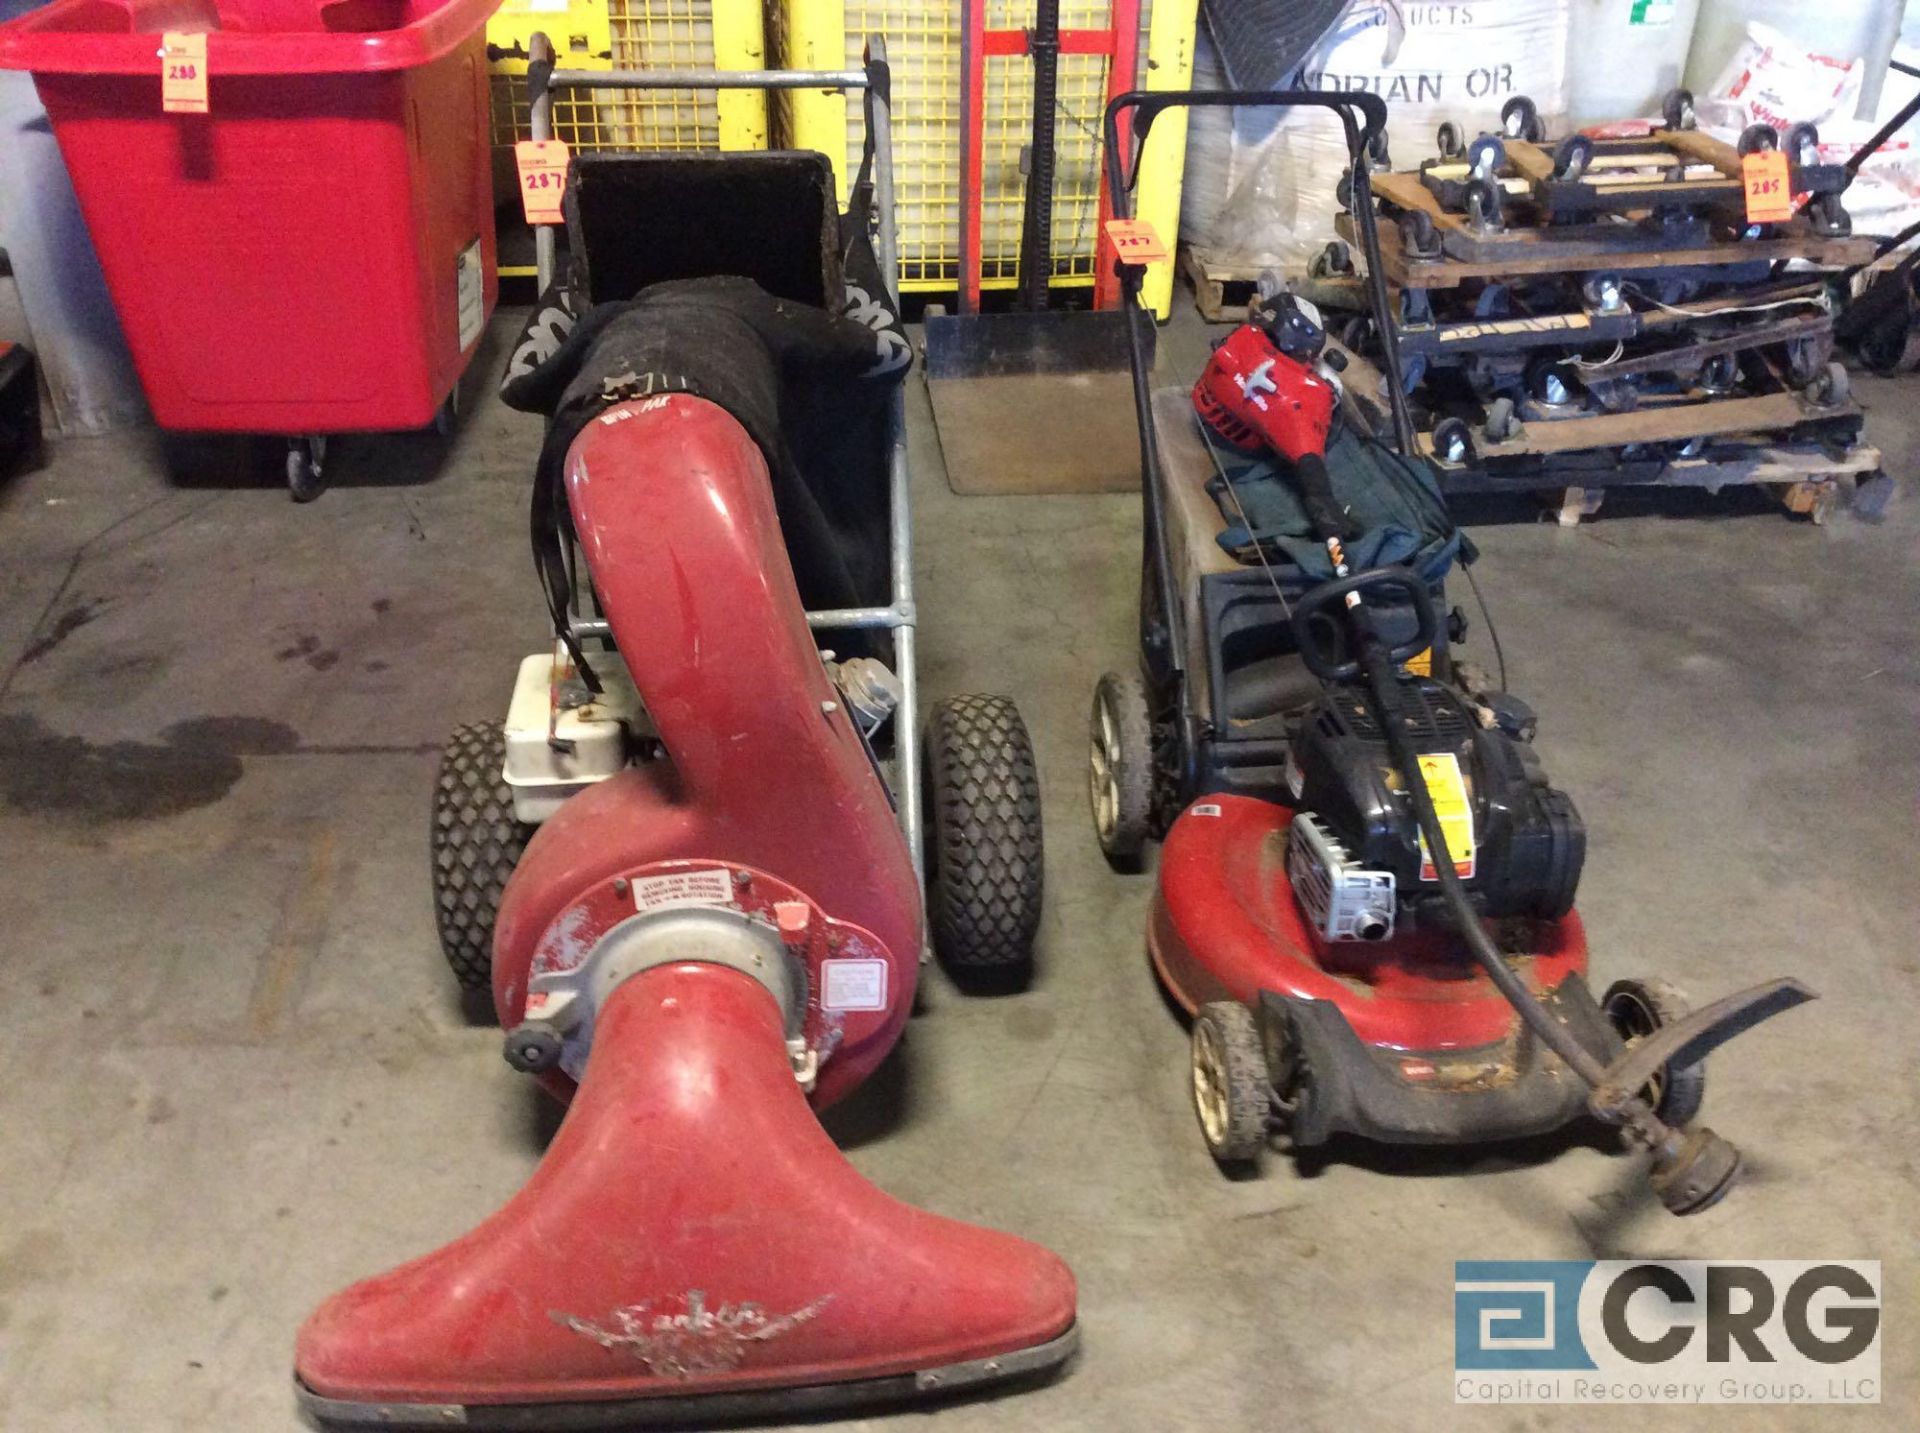 Lot of landscape items including walk behind mower, weed eater, and walk behind leaf vac